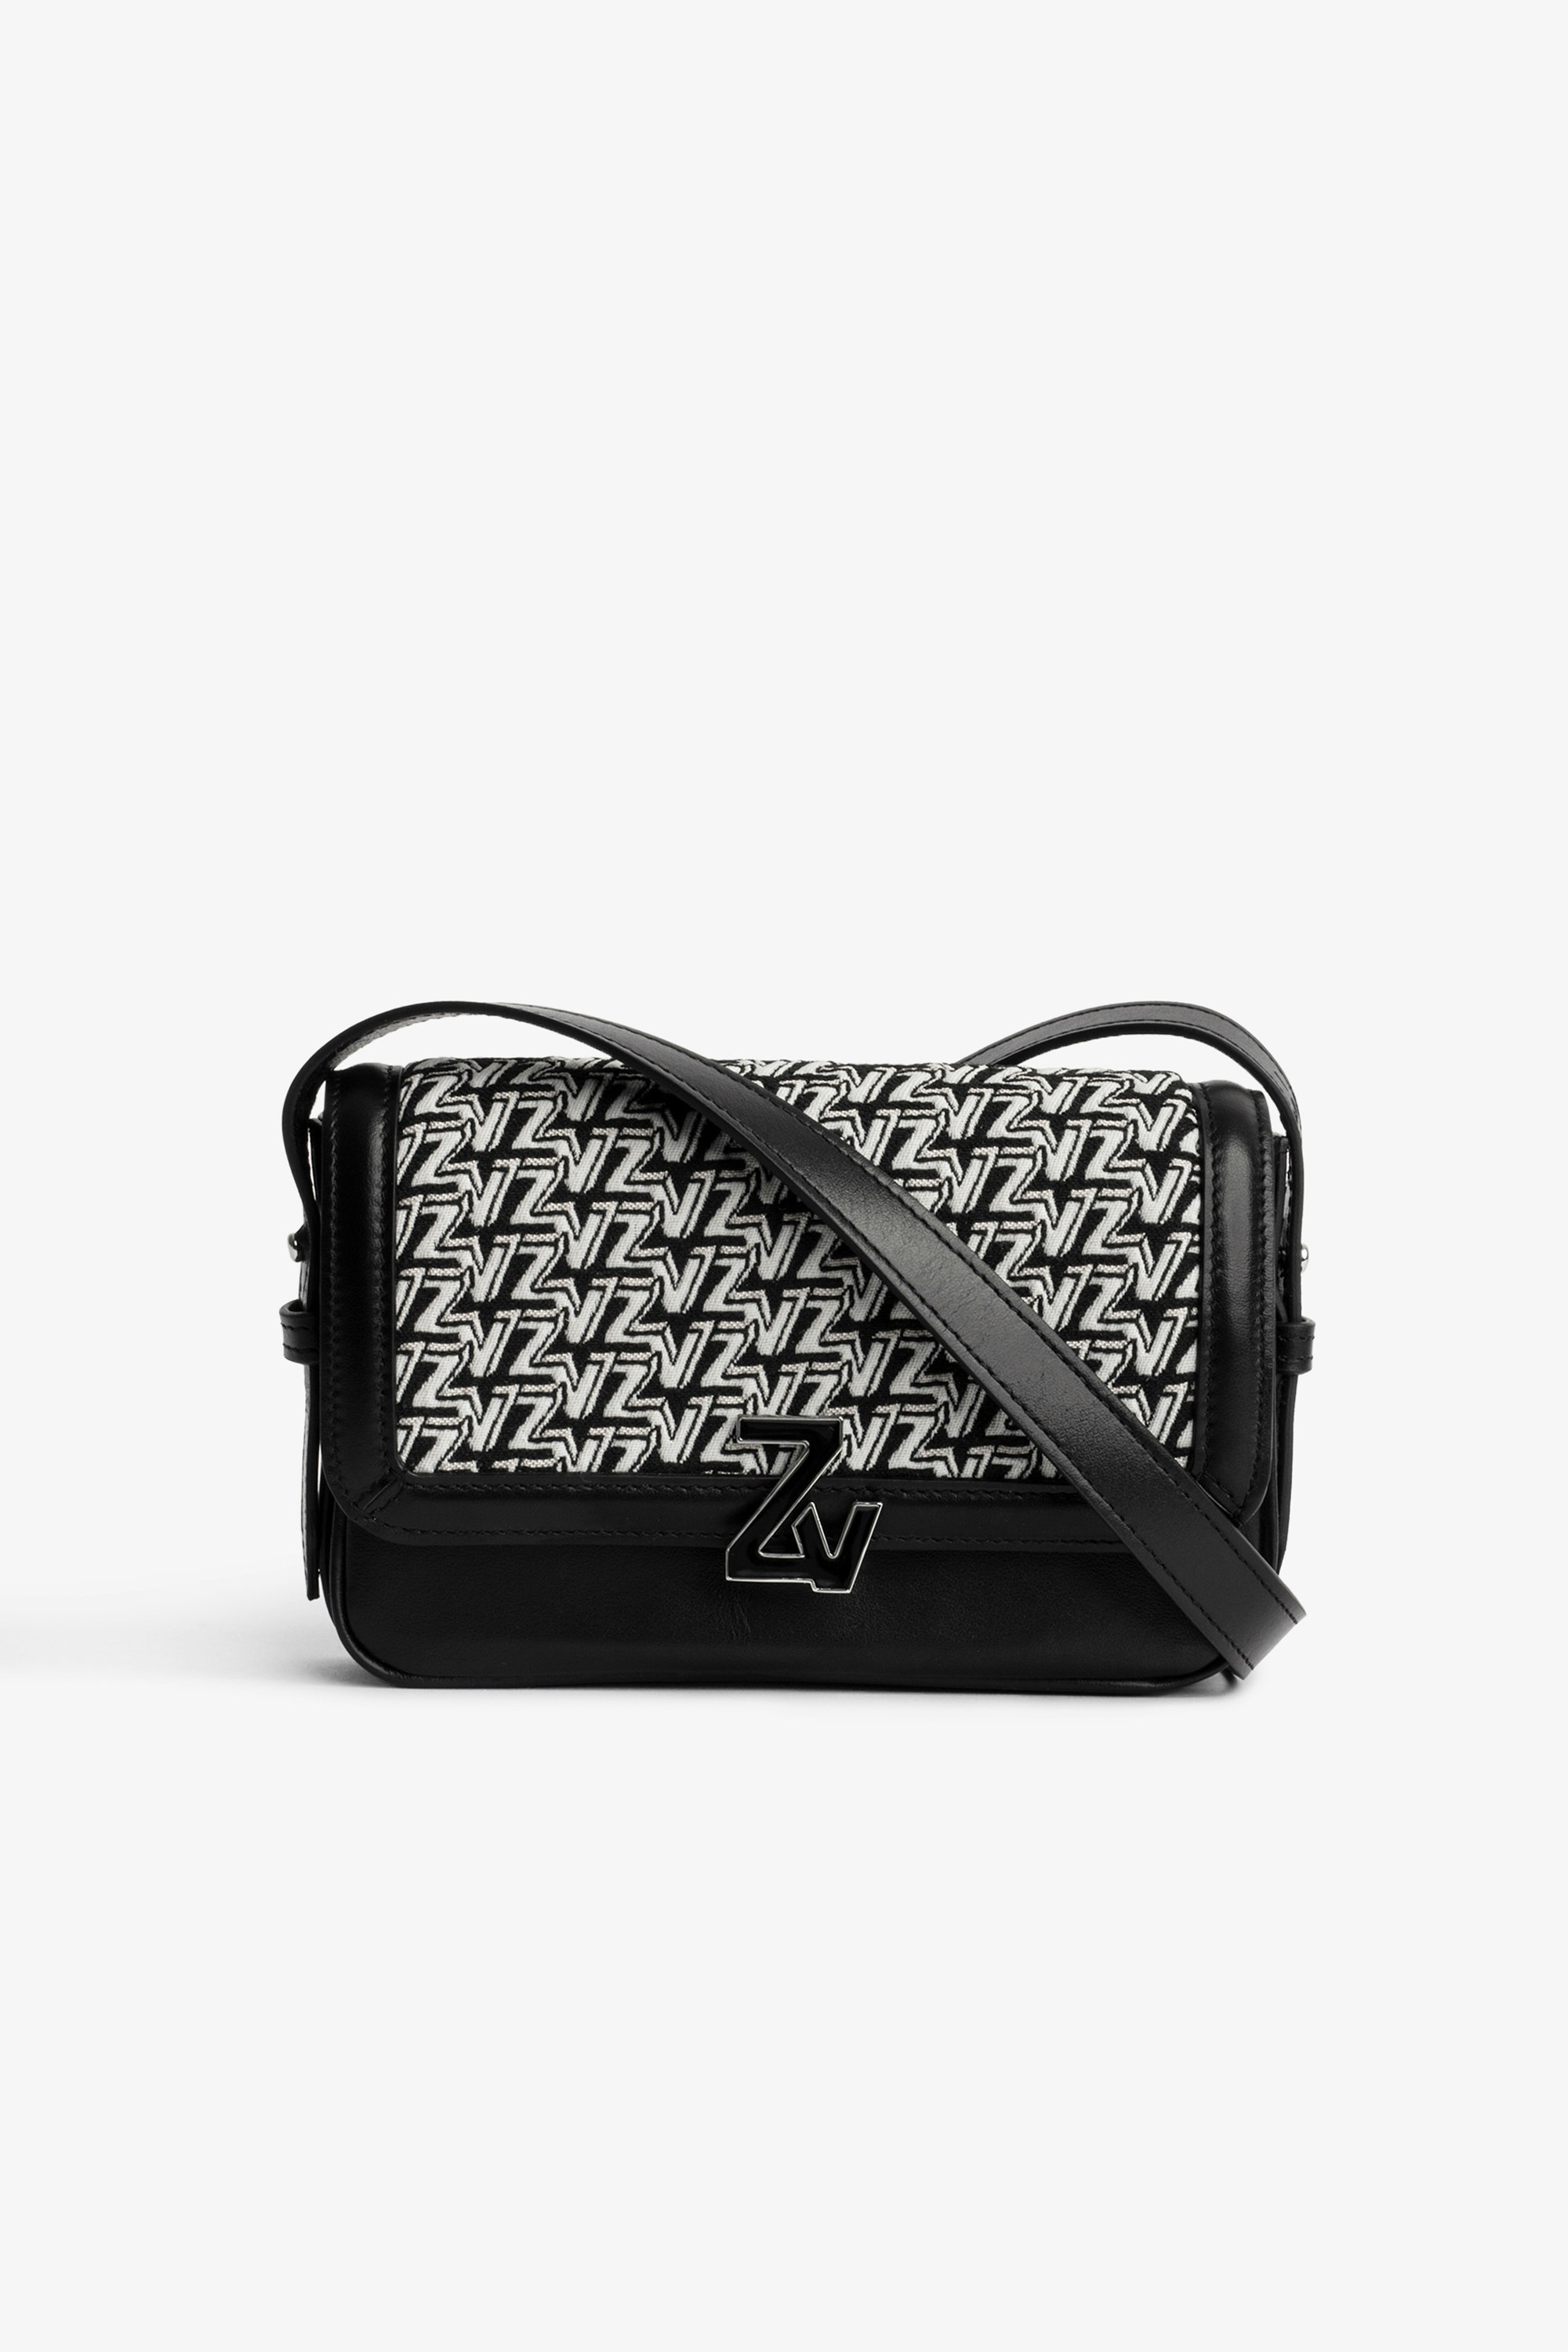 ZV Initiale Le Mini Monogram バッグ Women’s mini bag in black leather and ZV jacquard with flap and shoulder strap